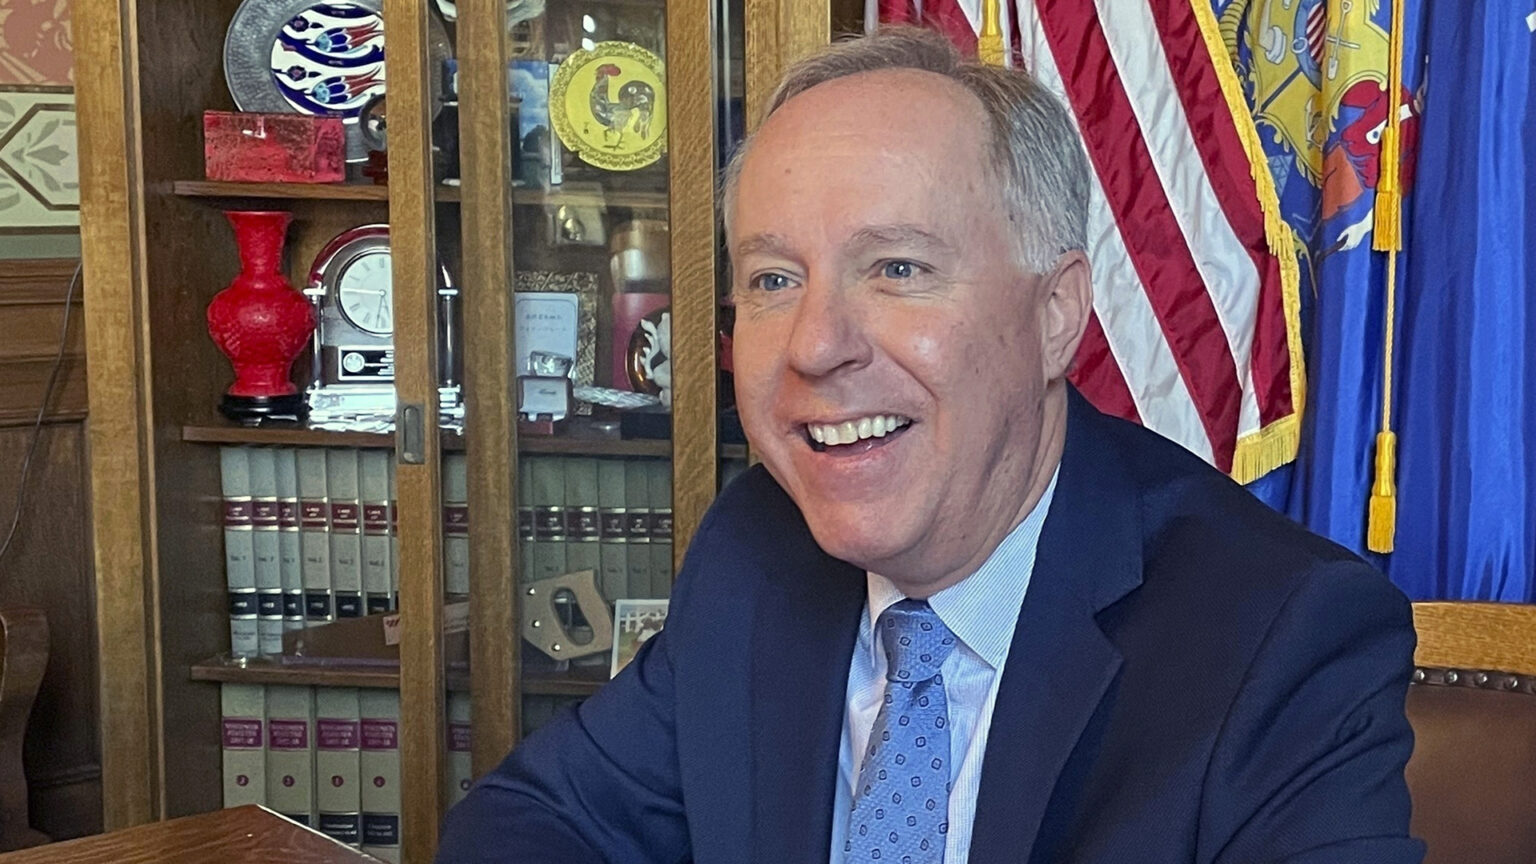 Robin Vos sits in a wood and leather curved back chair inside a room with the U.S. and Wisconsin flags, and a cabinet with law books and decorative items.